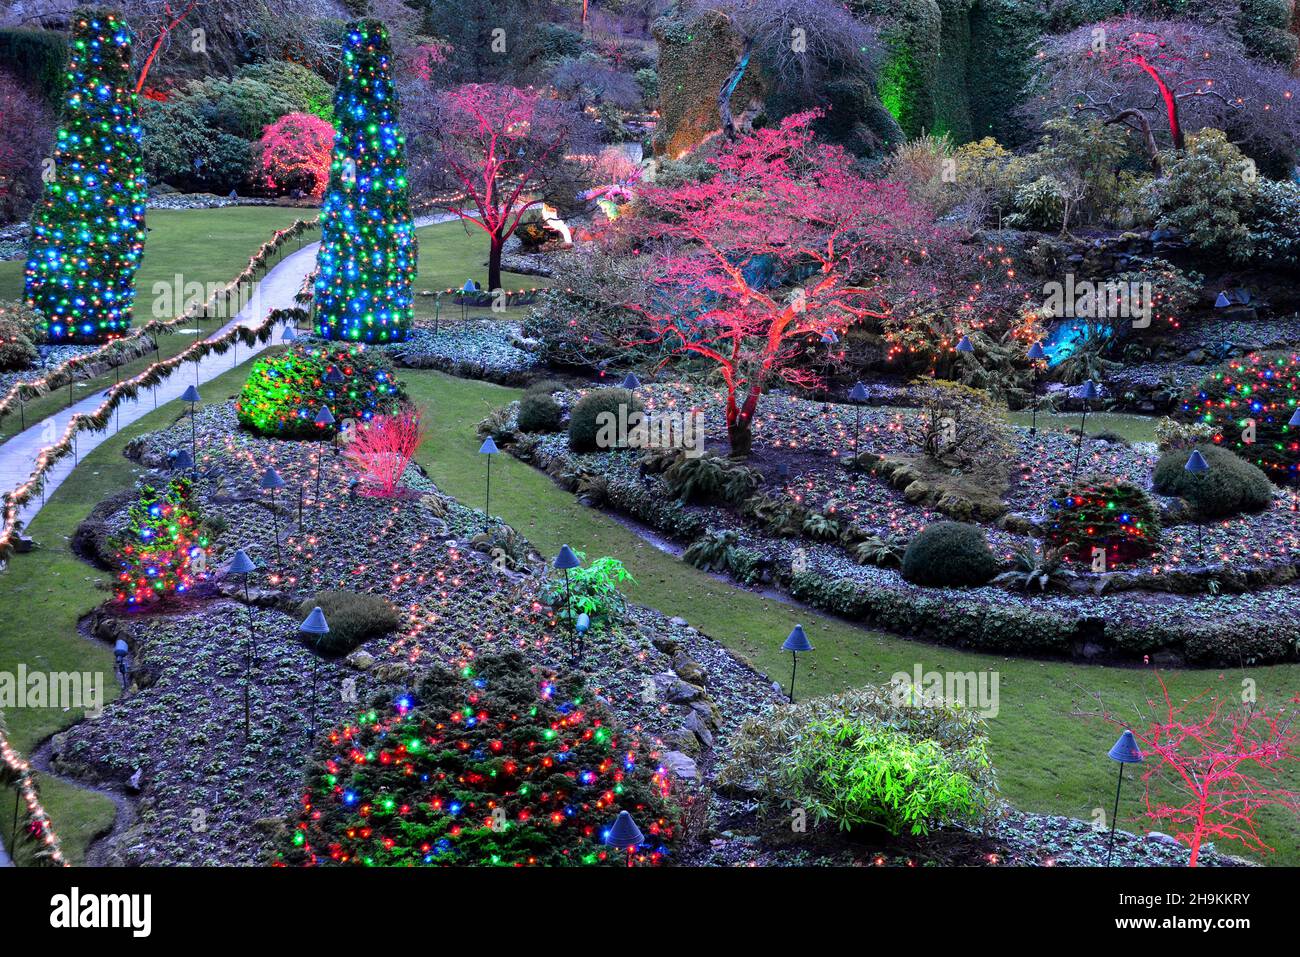 The sunken gardens at the Butchart Gardens at Christmas time in Victoria BC, Canada Stock Photo